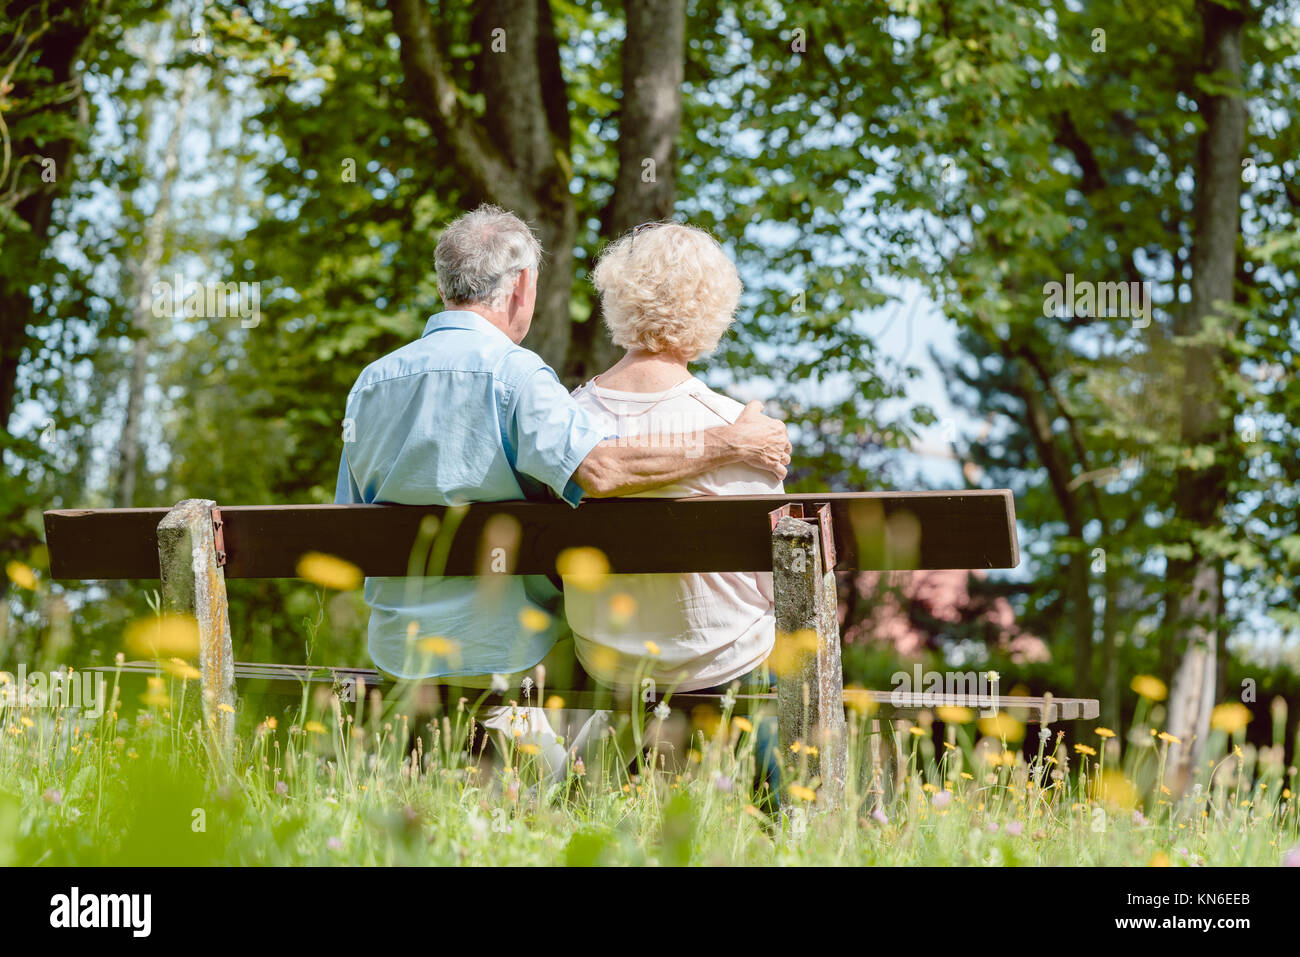 Romantic elderly couple sitting together on a bench in a tranqui Stock Photo